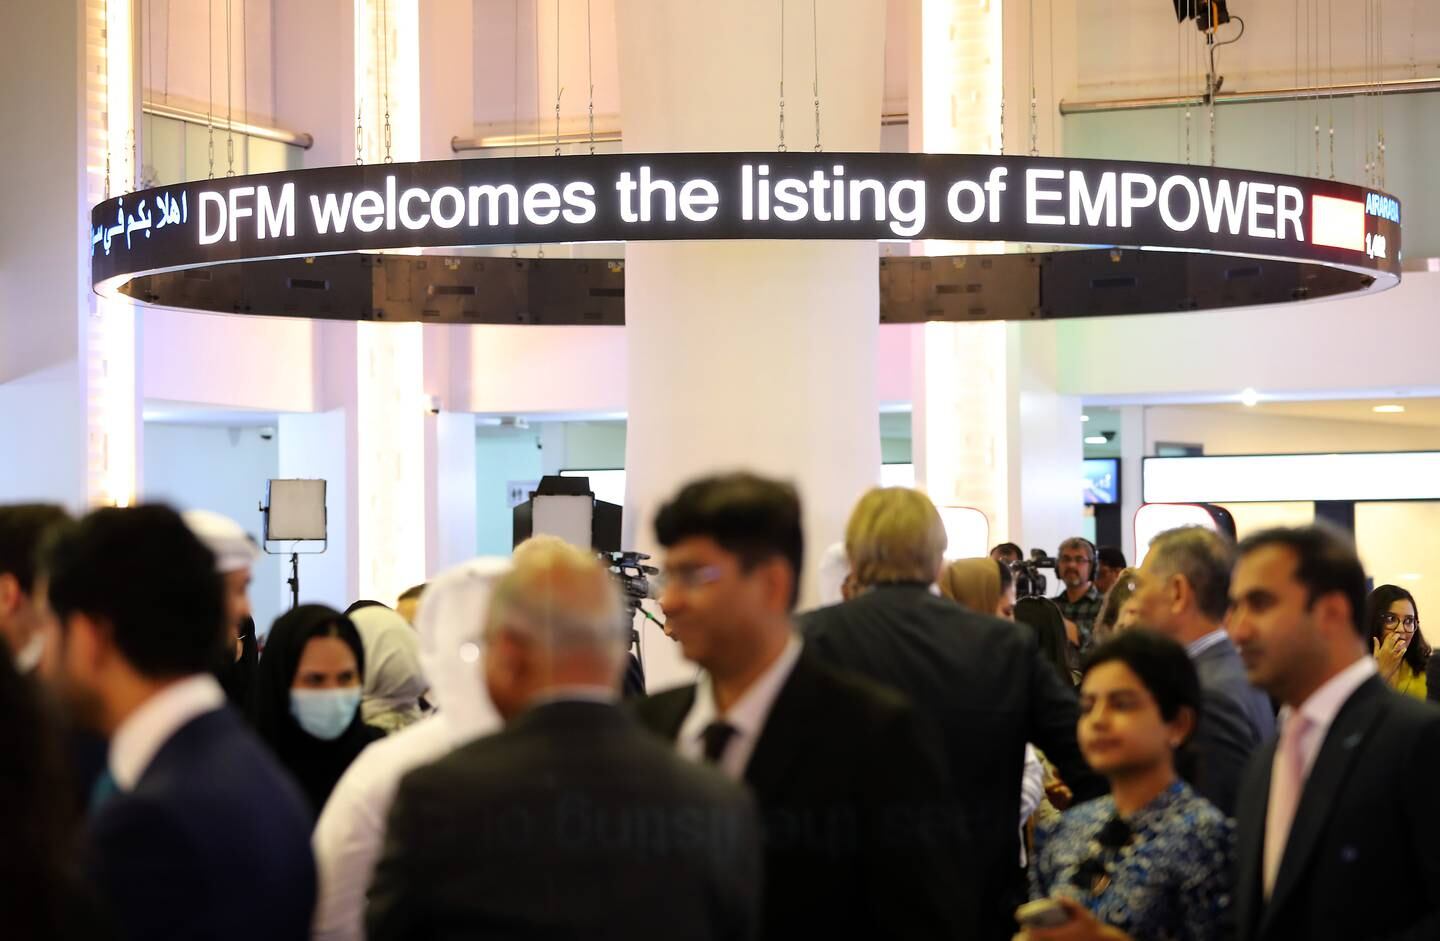 Guests celebrate the start of Empower's trading activity on the Dubai Financial Market. Pawan Singh / The National